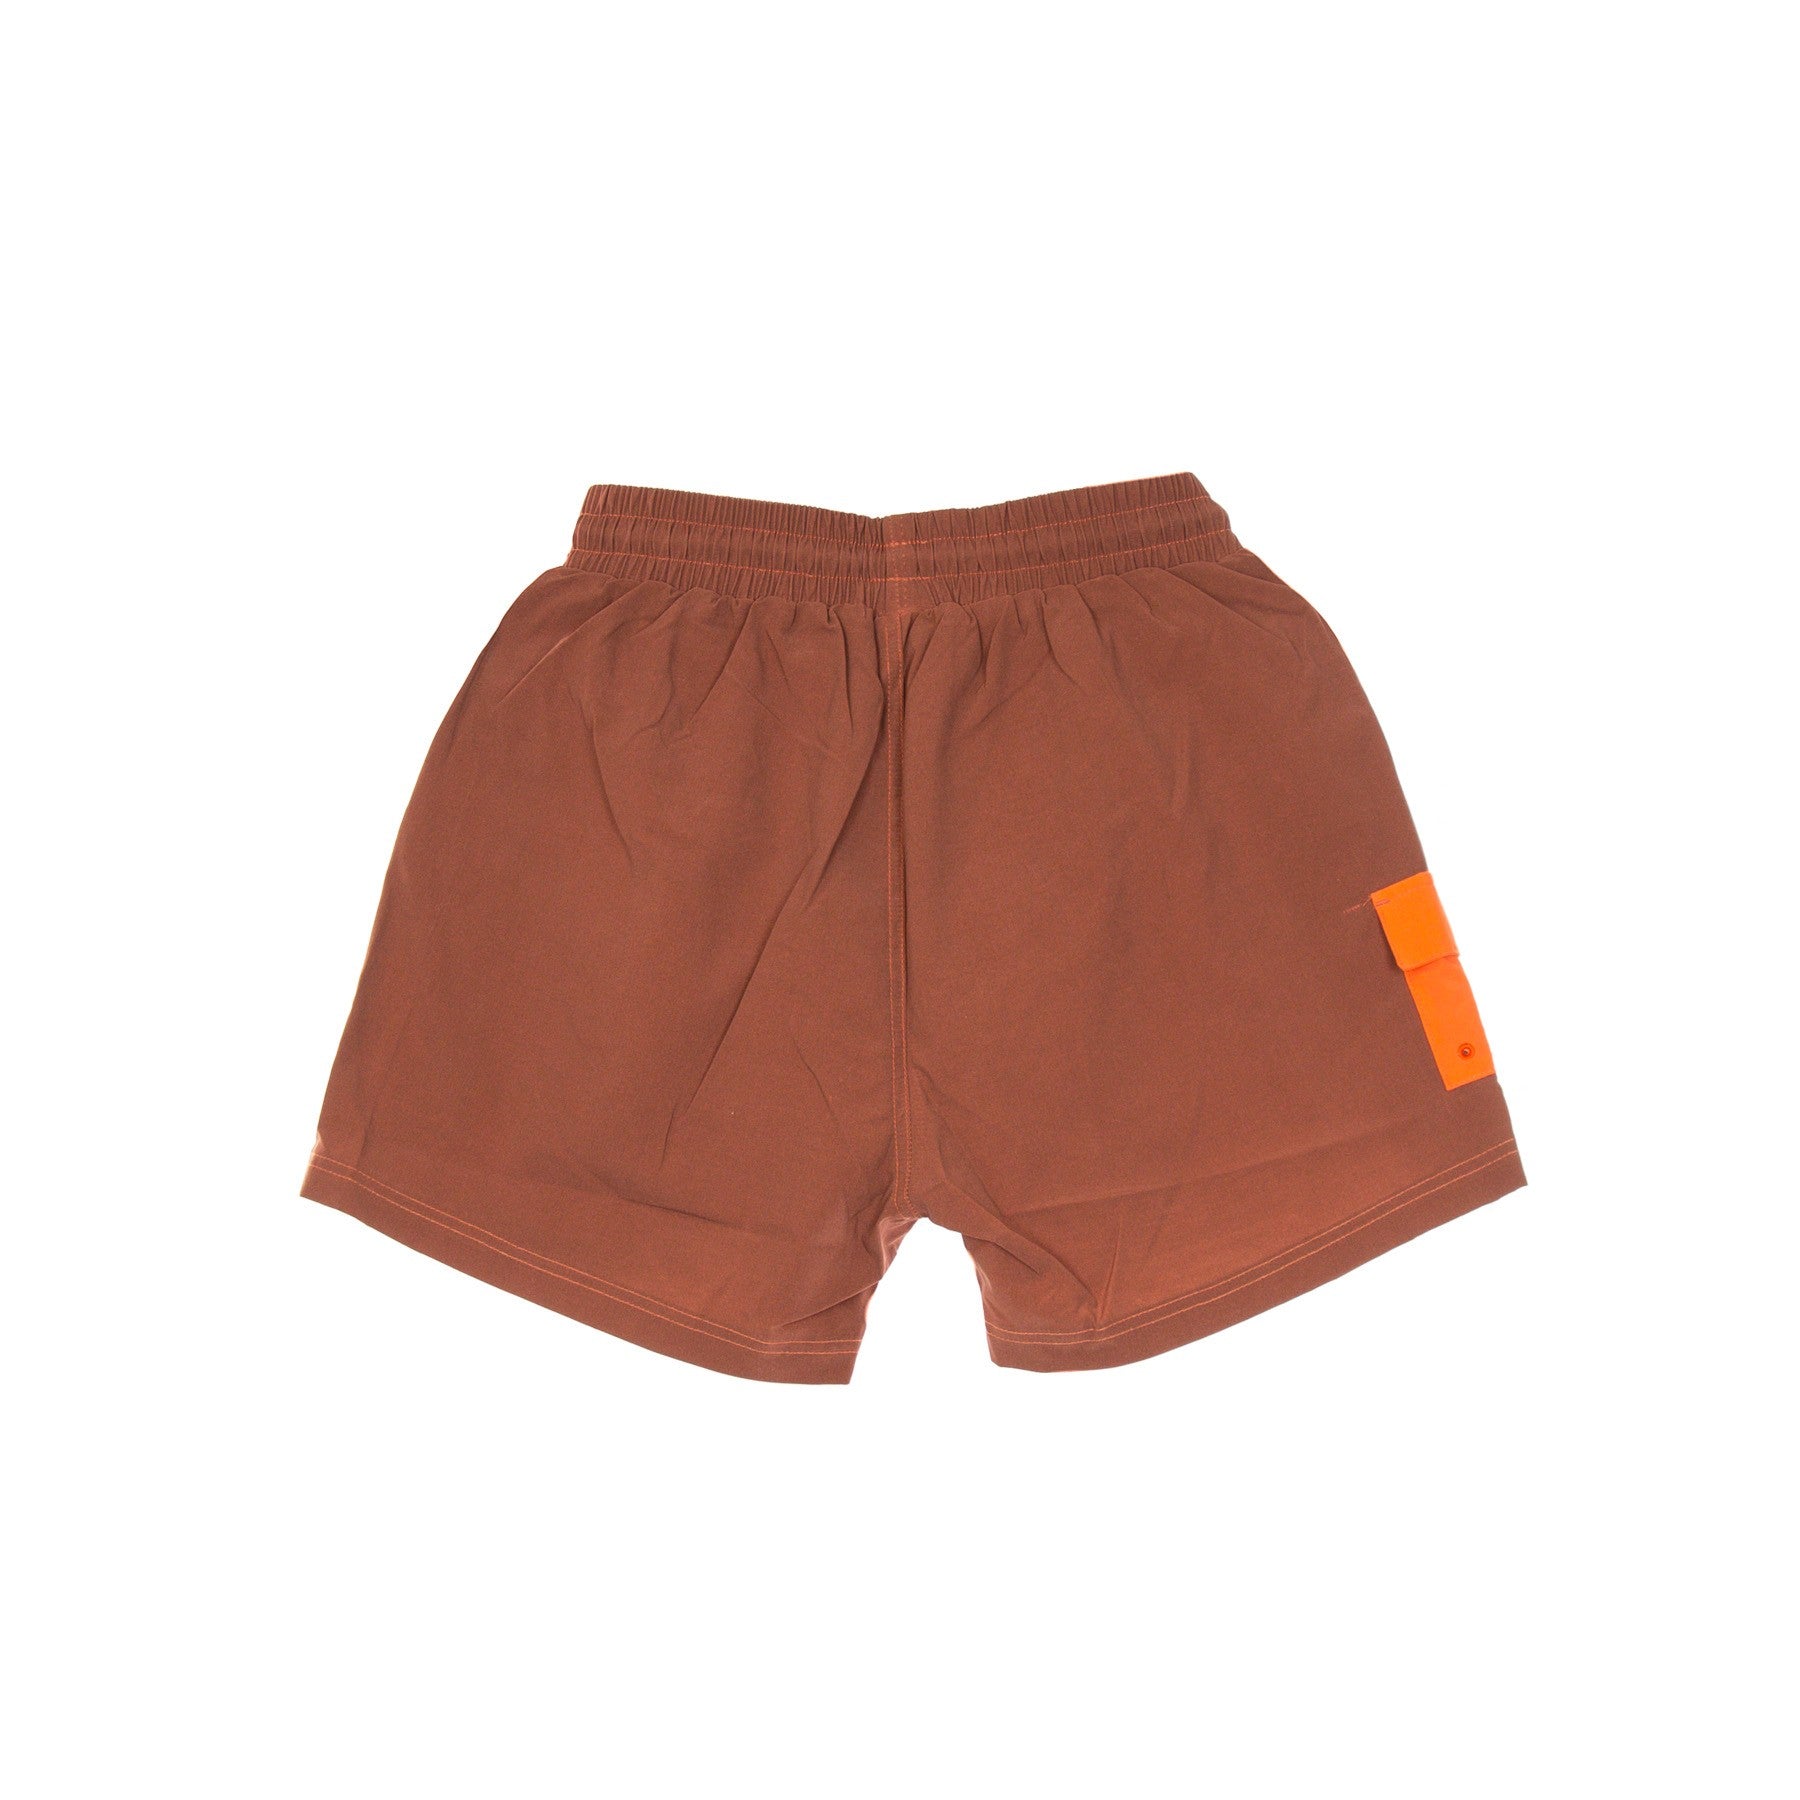 Dolly Noire, Costume Pantaloncino Uomo Thermo Reactive Swimshorts, 